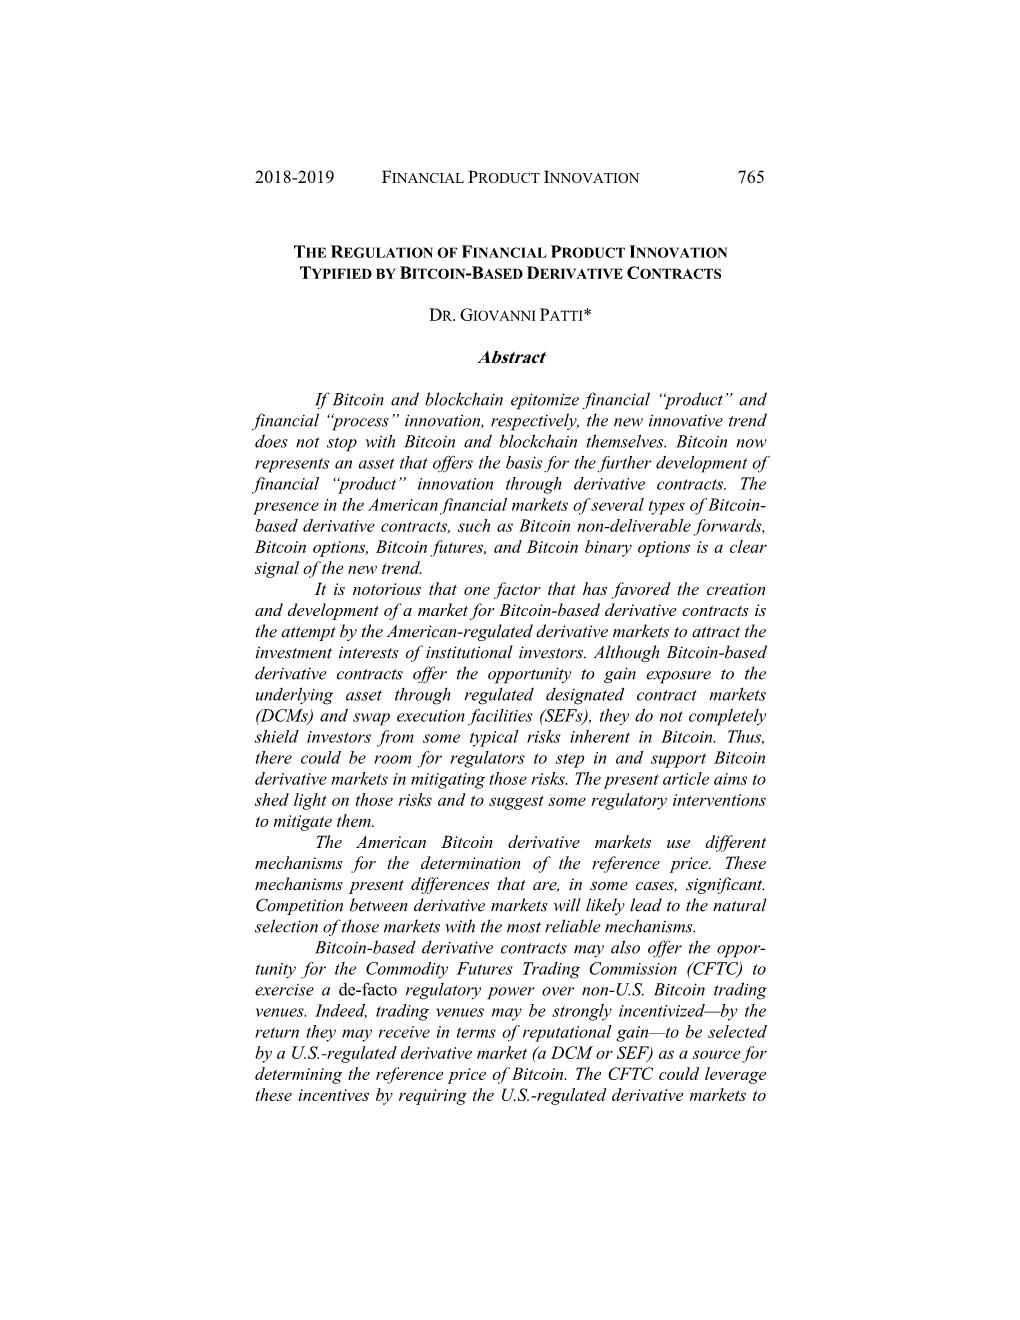 The Regulation of Financial Product Innovation Typified by Bitcoin-Based Derivative Contracts